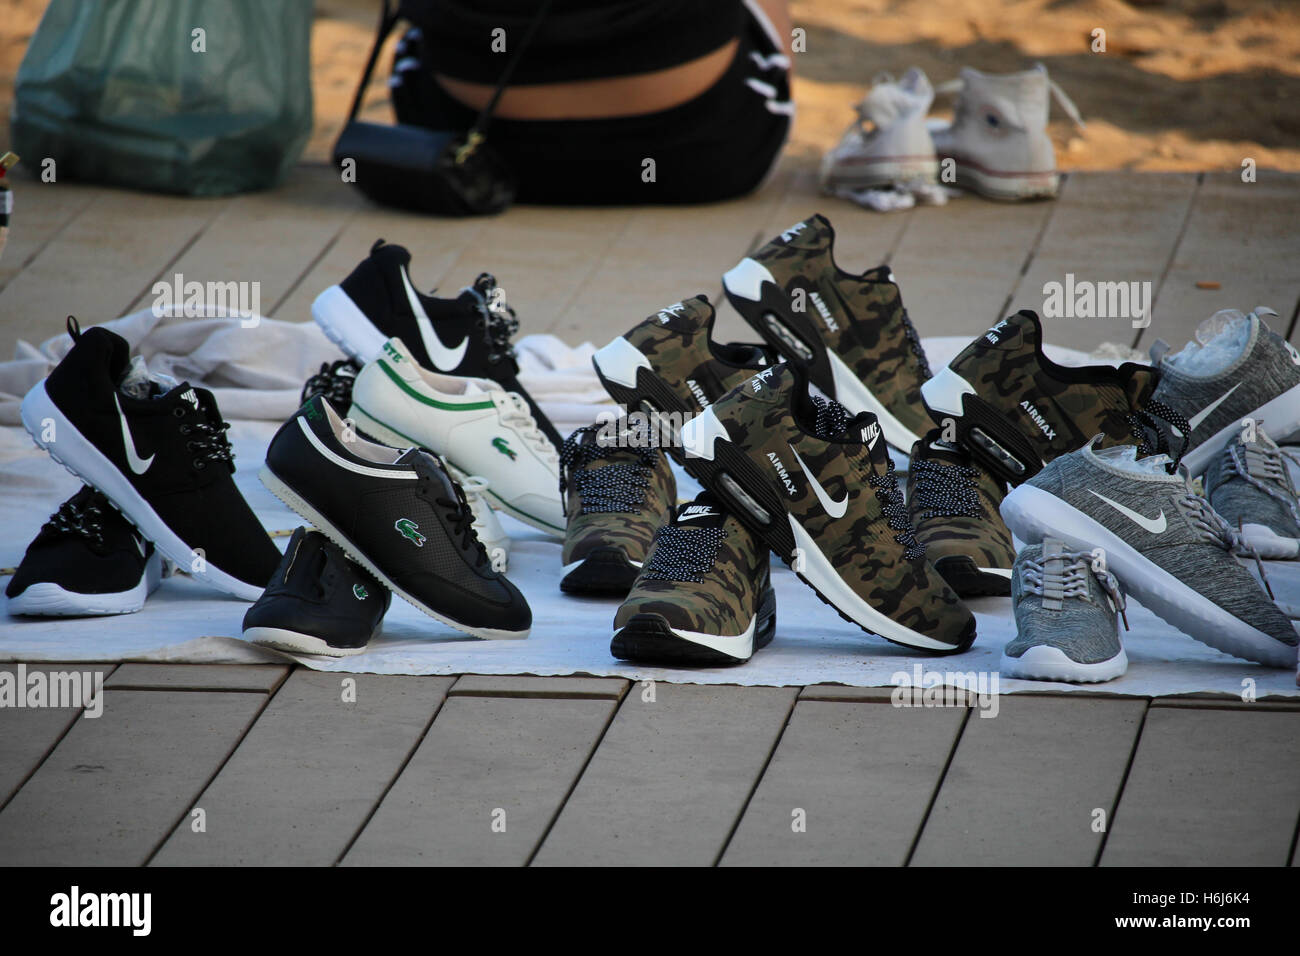 Barcelona, Spain - October 29, 2016: Copies of popular brands of shoes sold on the Barceloneta beach. Although it is illegal, the phenomenon called 'top manta' is extended in central Barcelona, with hundreds of street sellers in the most popular tourist locations of the city. Credit:  Dino Geromella/Alamy Live News Stock Photo